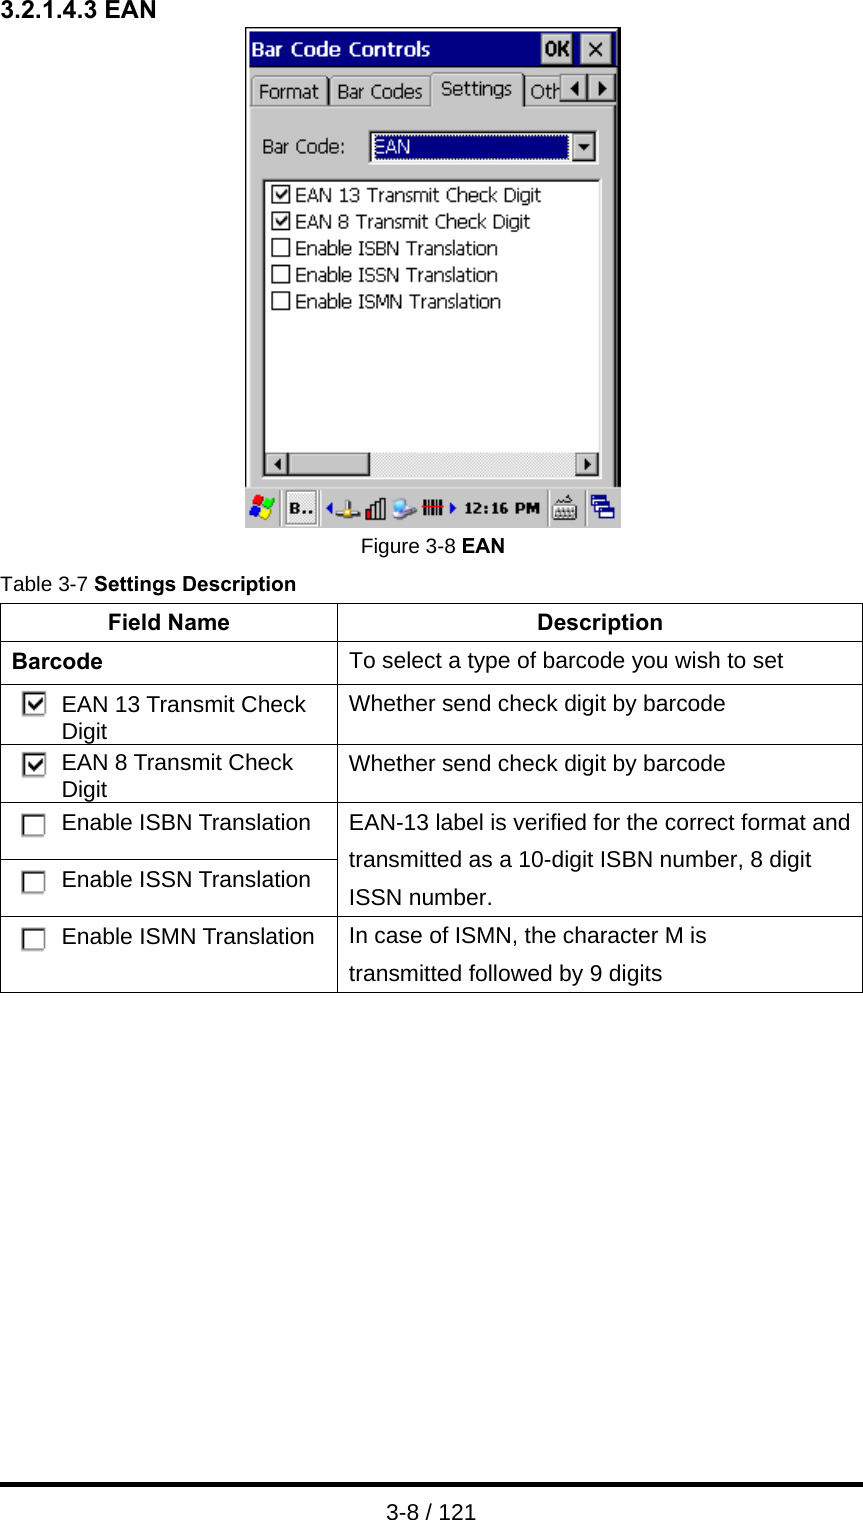  3-8 / 121 3.2.1.4.3 EAN  Figure 3-8 EAN Table 3-7 Settings Description Field Name  Description Barcode  To select a type of barcode you wish to set EAN 13 Transmit Check Digit  Whether send check digit by barcode EAN 8 Transmit Check Digit  Whether send check digit by barcode Enable ISBN Translation Enable ISSN Translation EAN-13 label is verified for the correct format and transmitted as a 10-digit ISBN number, 8 digit ISSN number.   Enable ISMN Translation  In case of ISMN, the character M is transmitted followed by 9 digits    